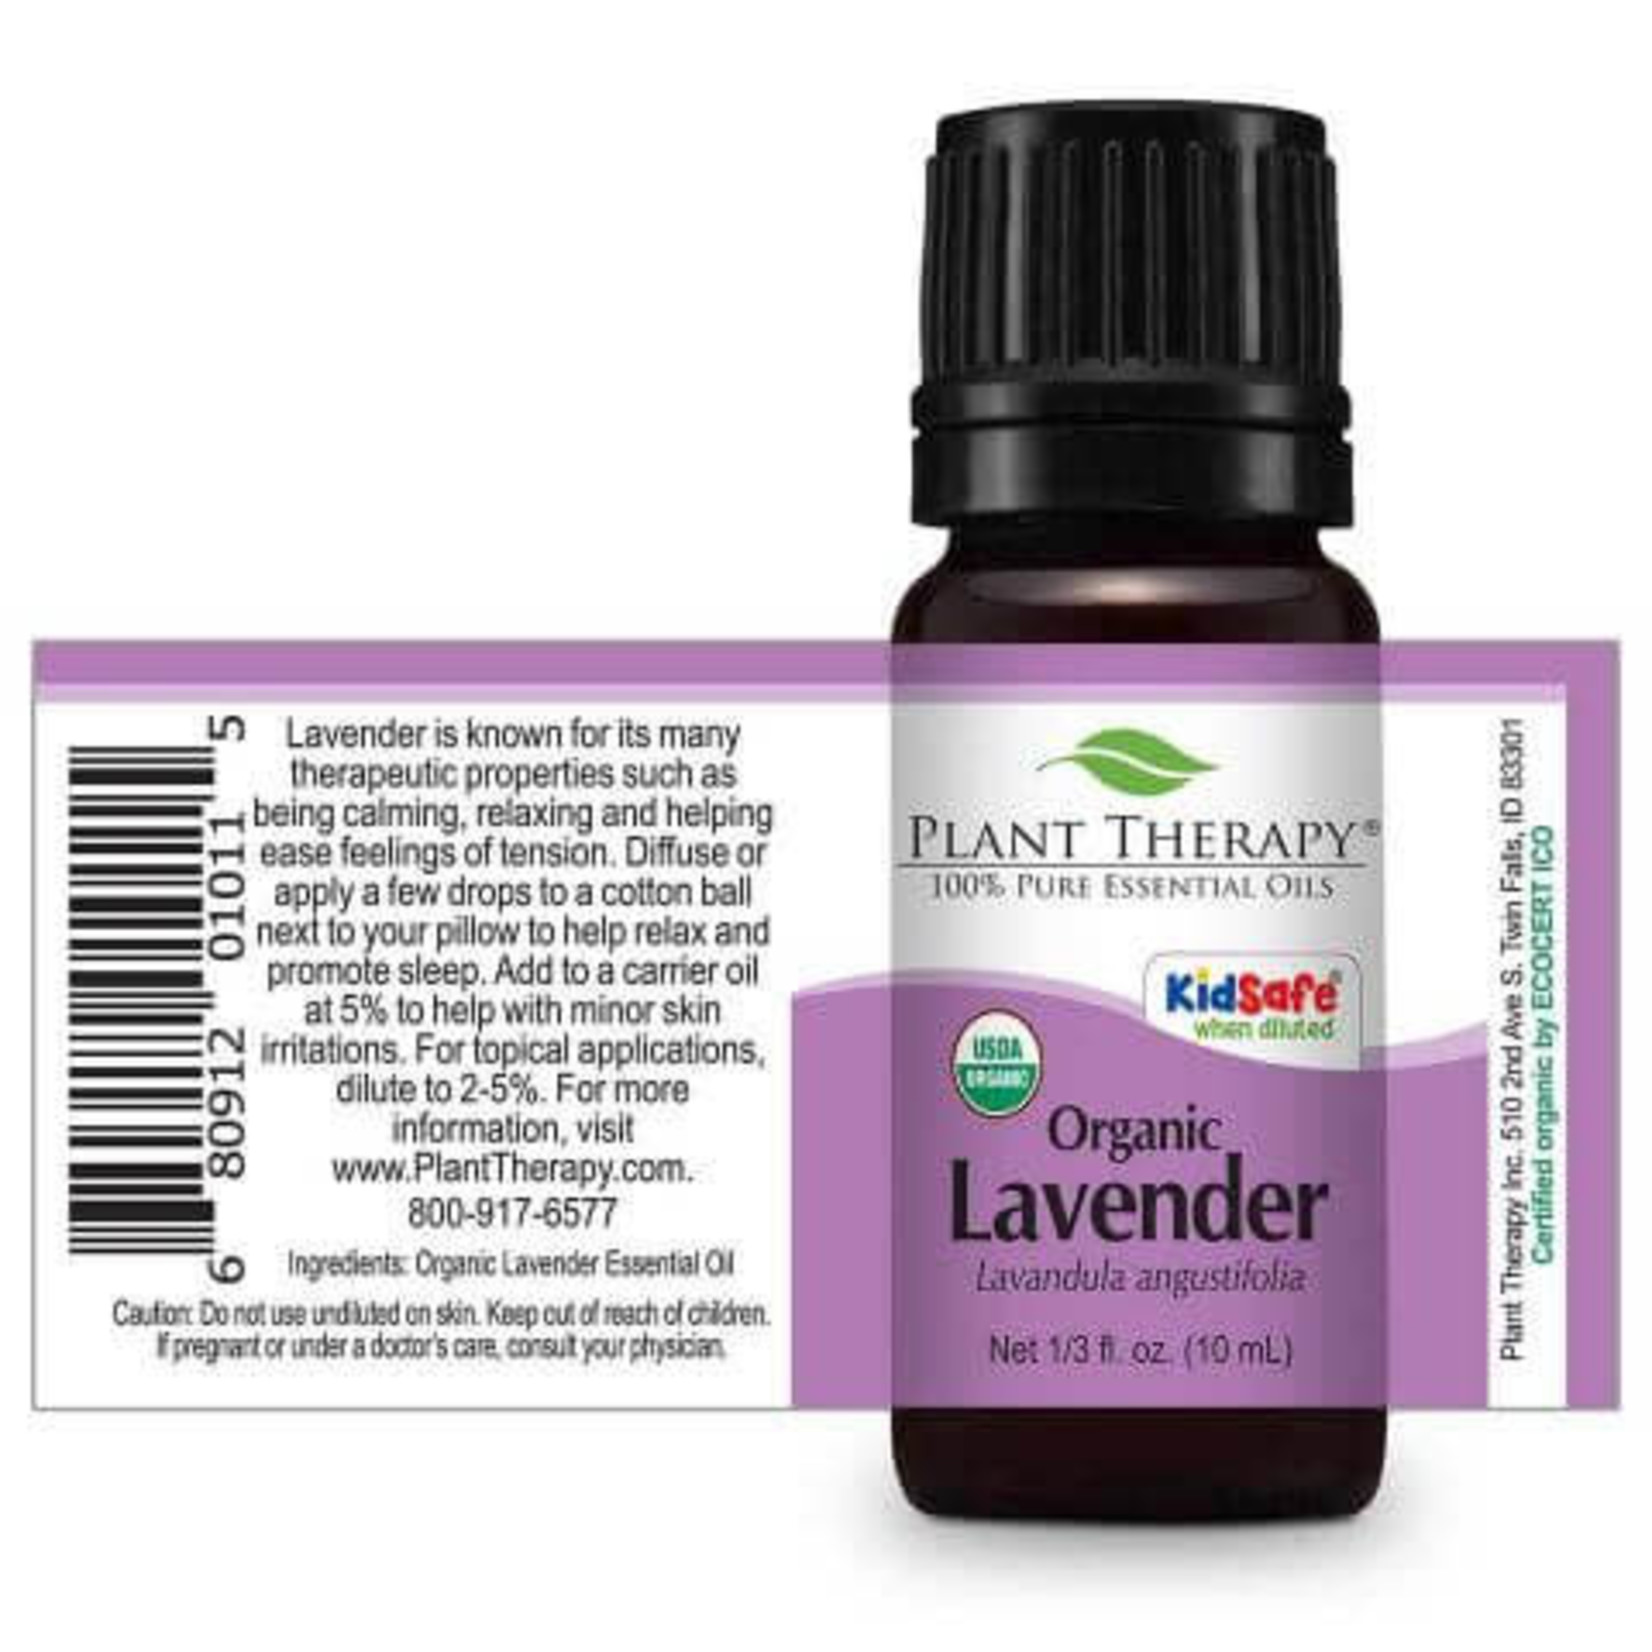 Plant Therapy PT Lavender Organic Essential Oil